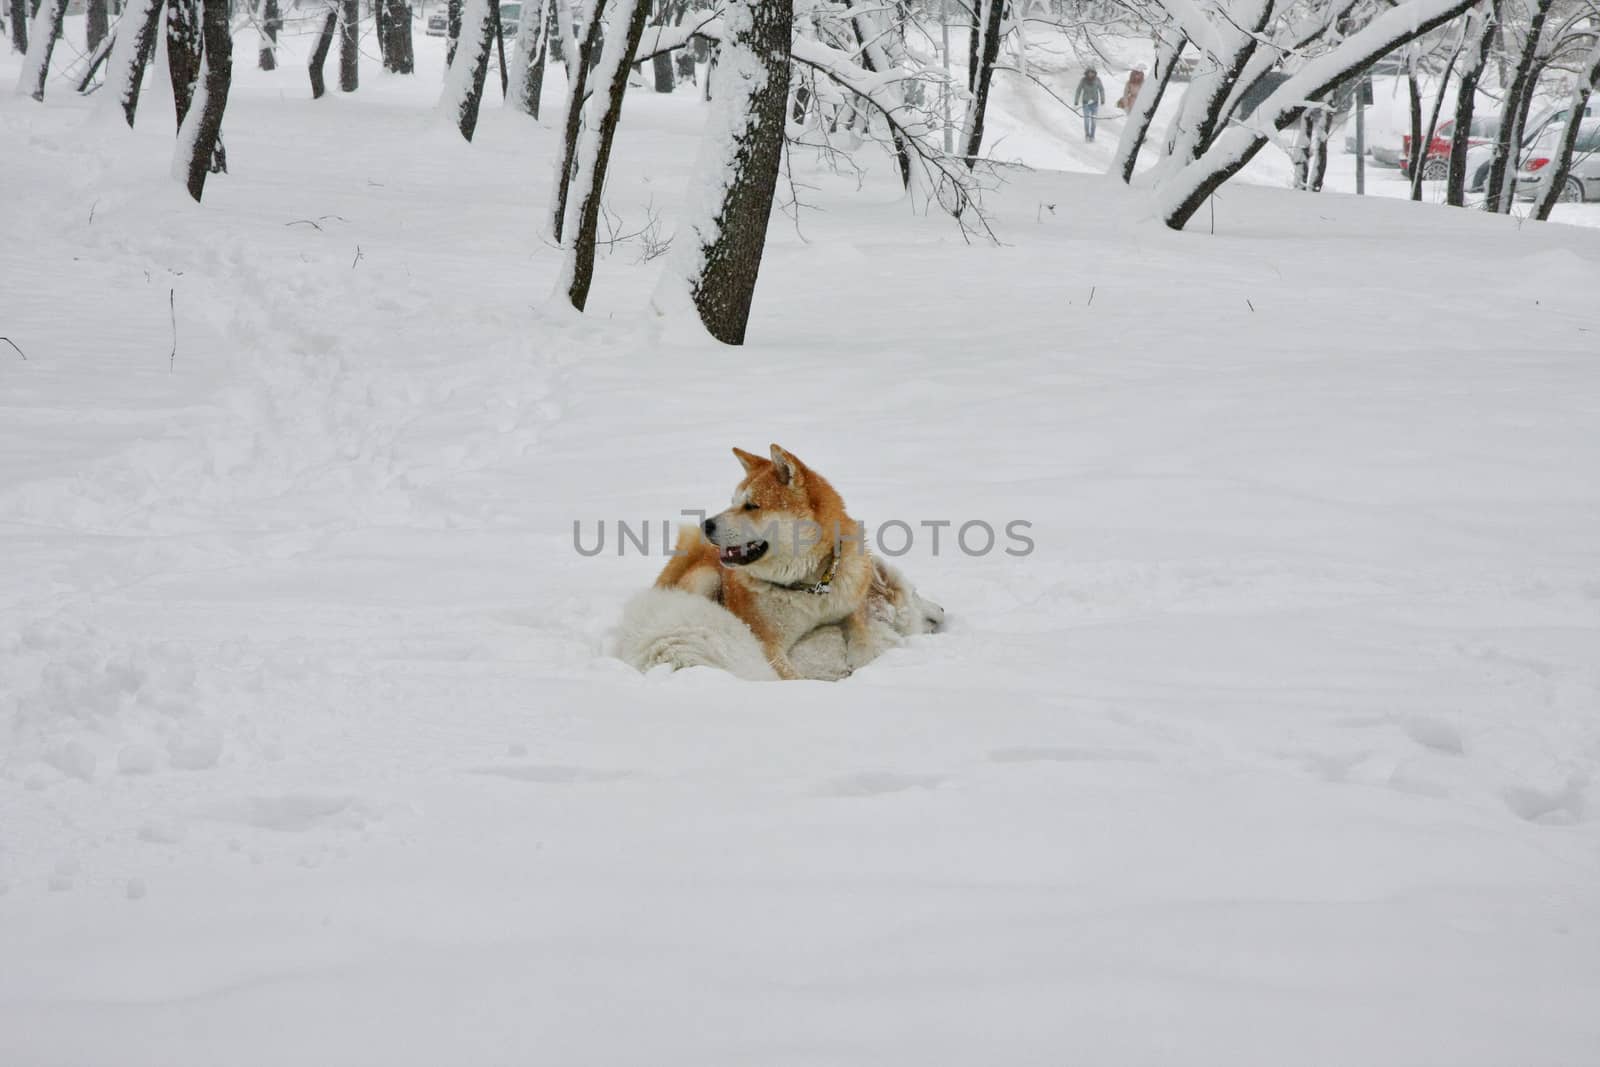 Dog games in the snow by tdjoric